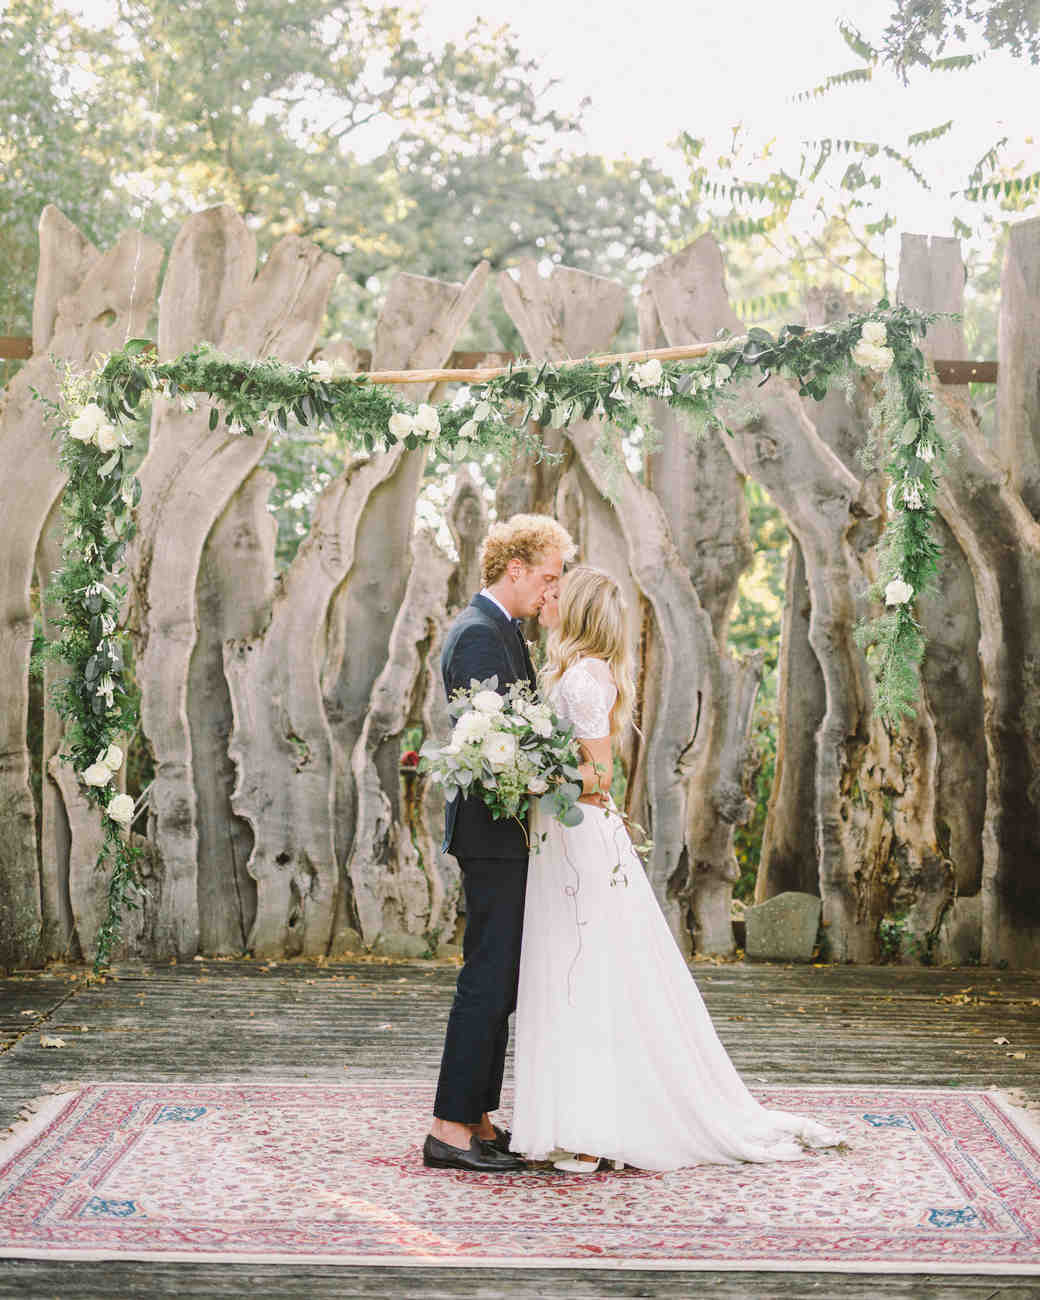 A Bohemian Wedding Trend We're Loving: Ceremony Aisles with Rugs ...